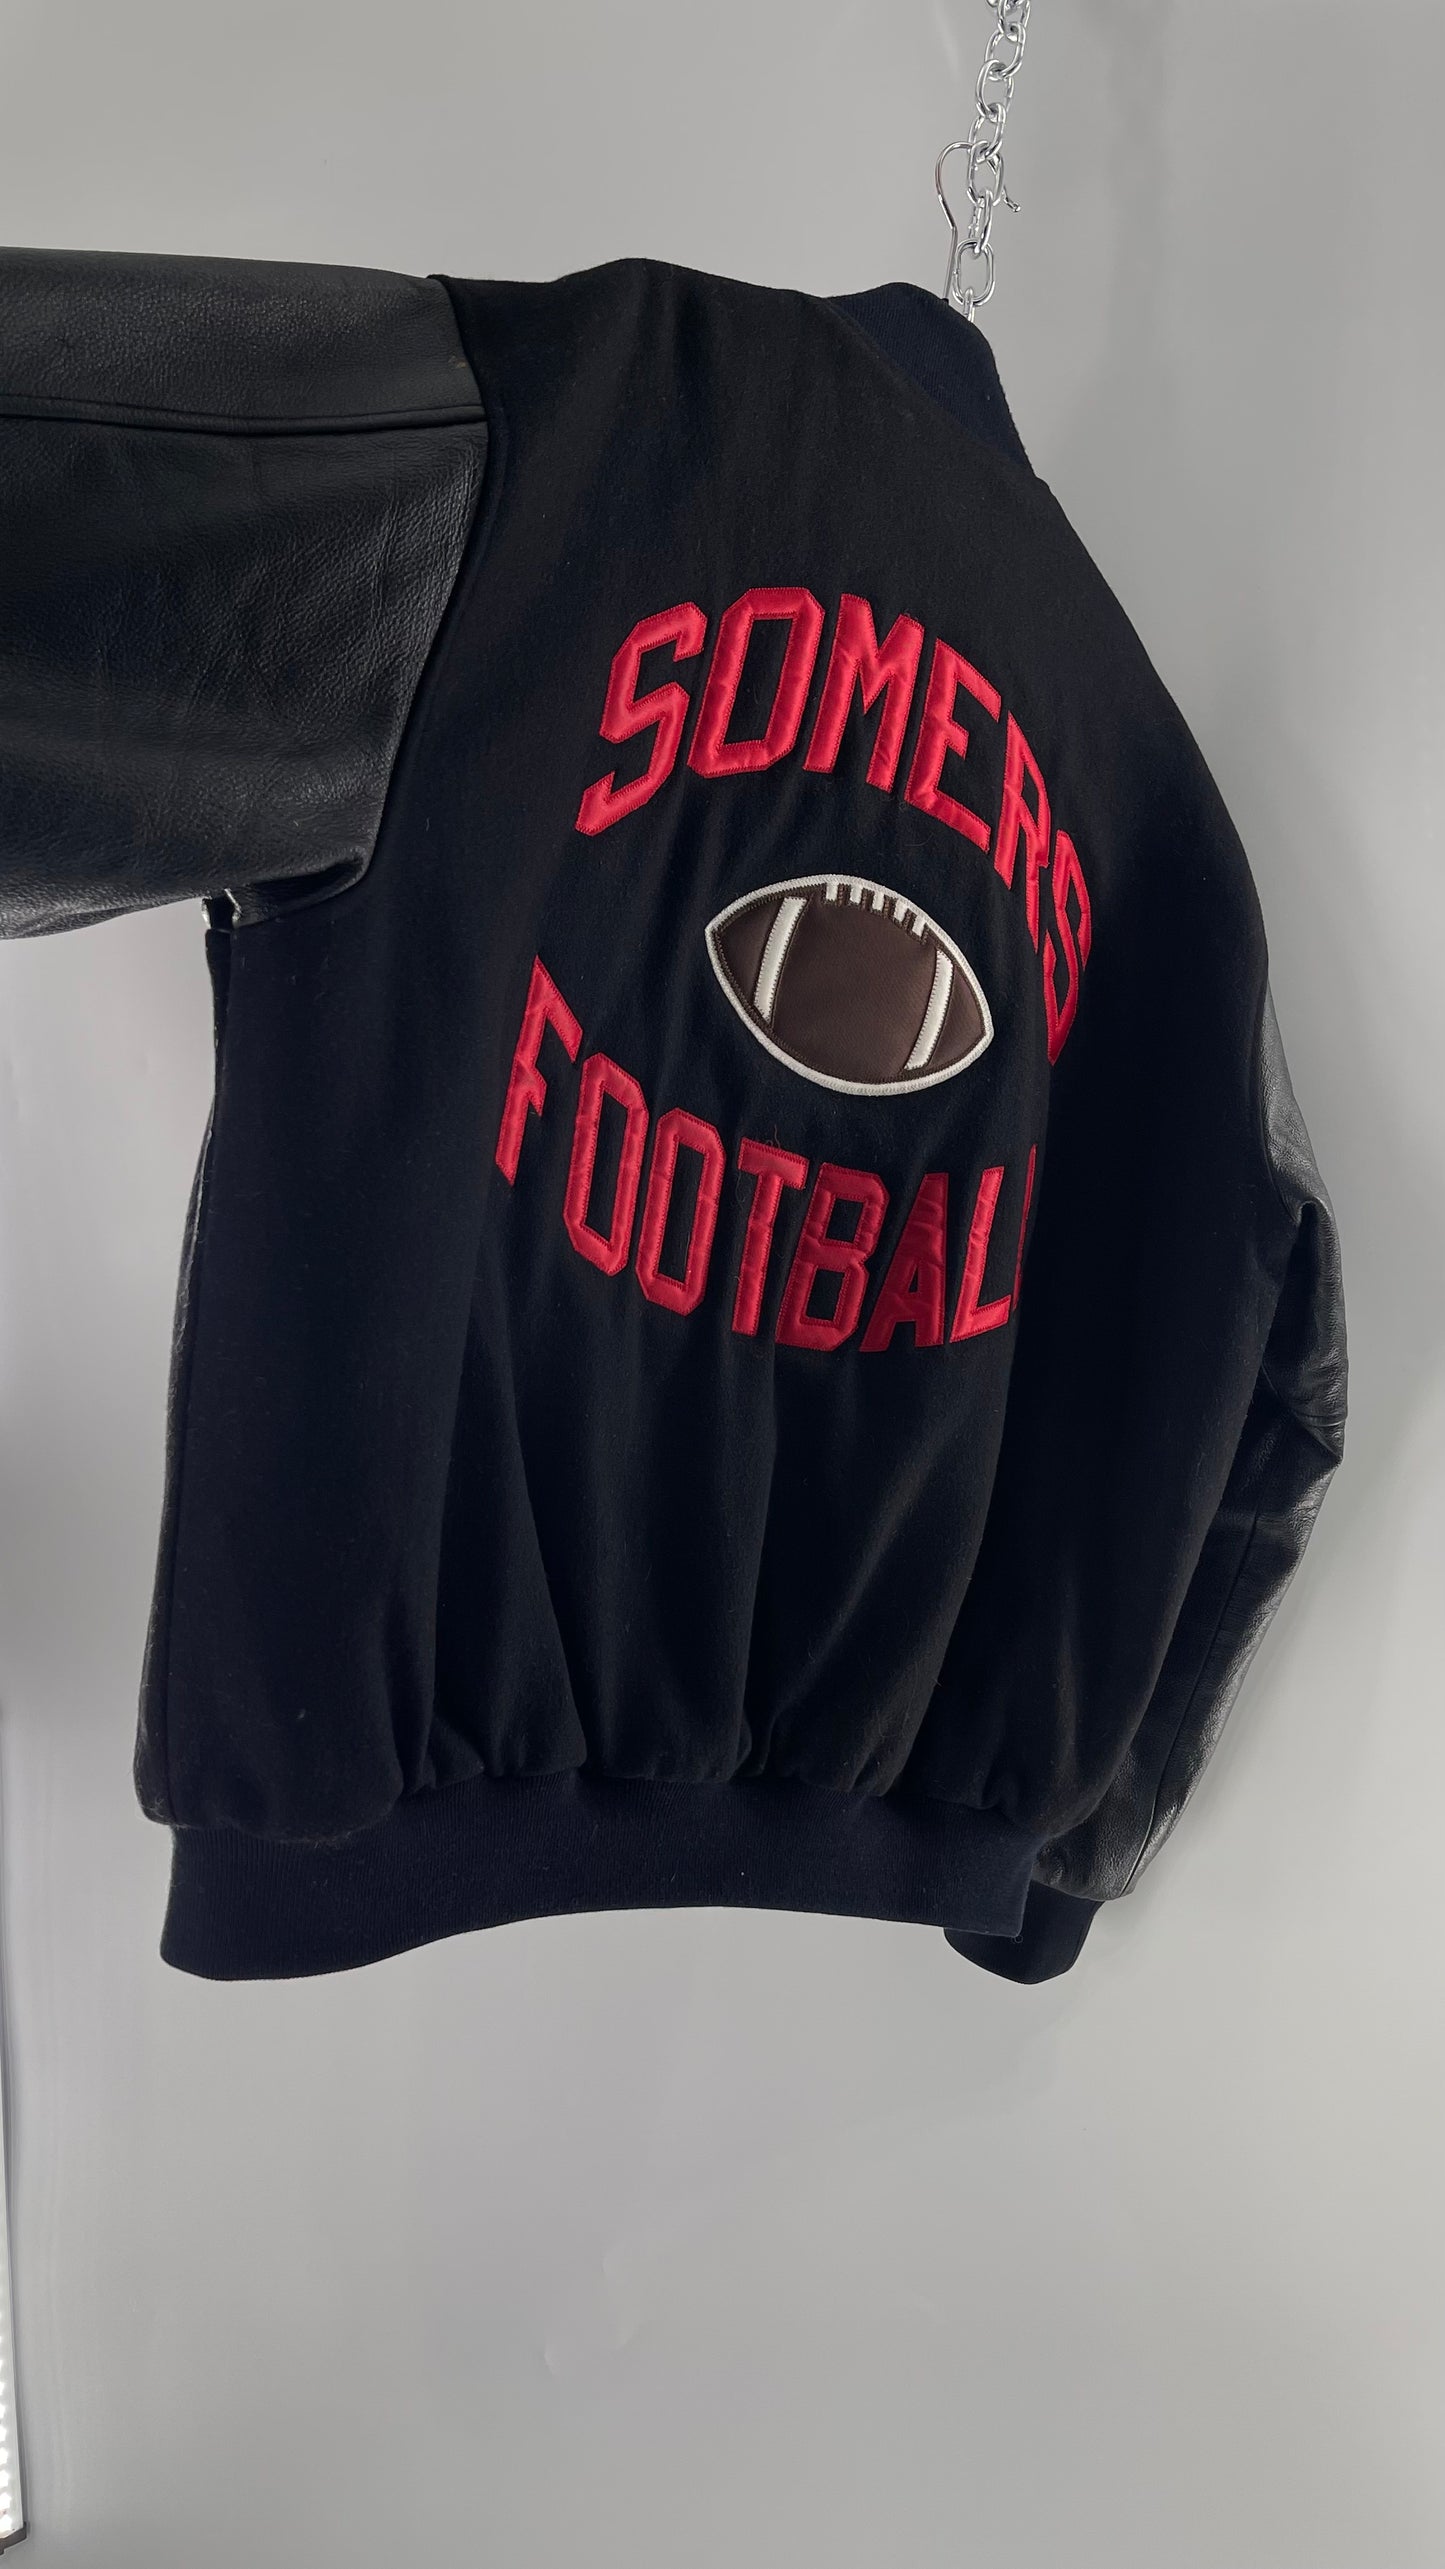 Vintage Somers Football Varsity Jacket with Leather Sleeves “Matt” Embroidery and Red Lettering (XL)